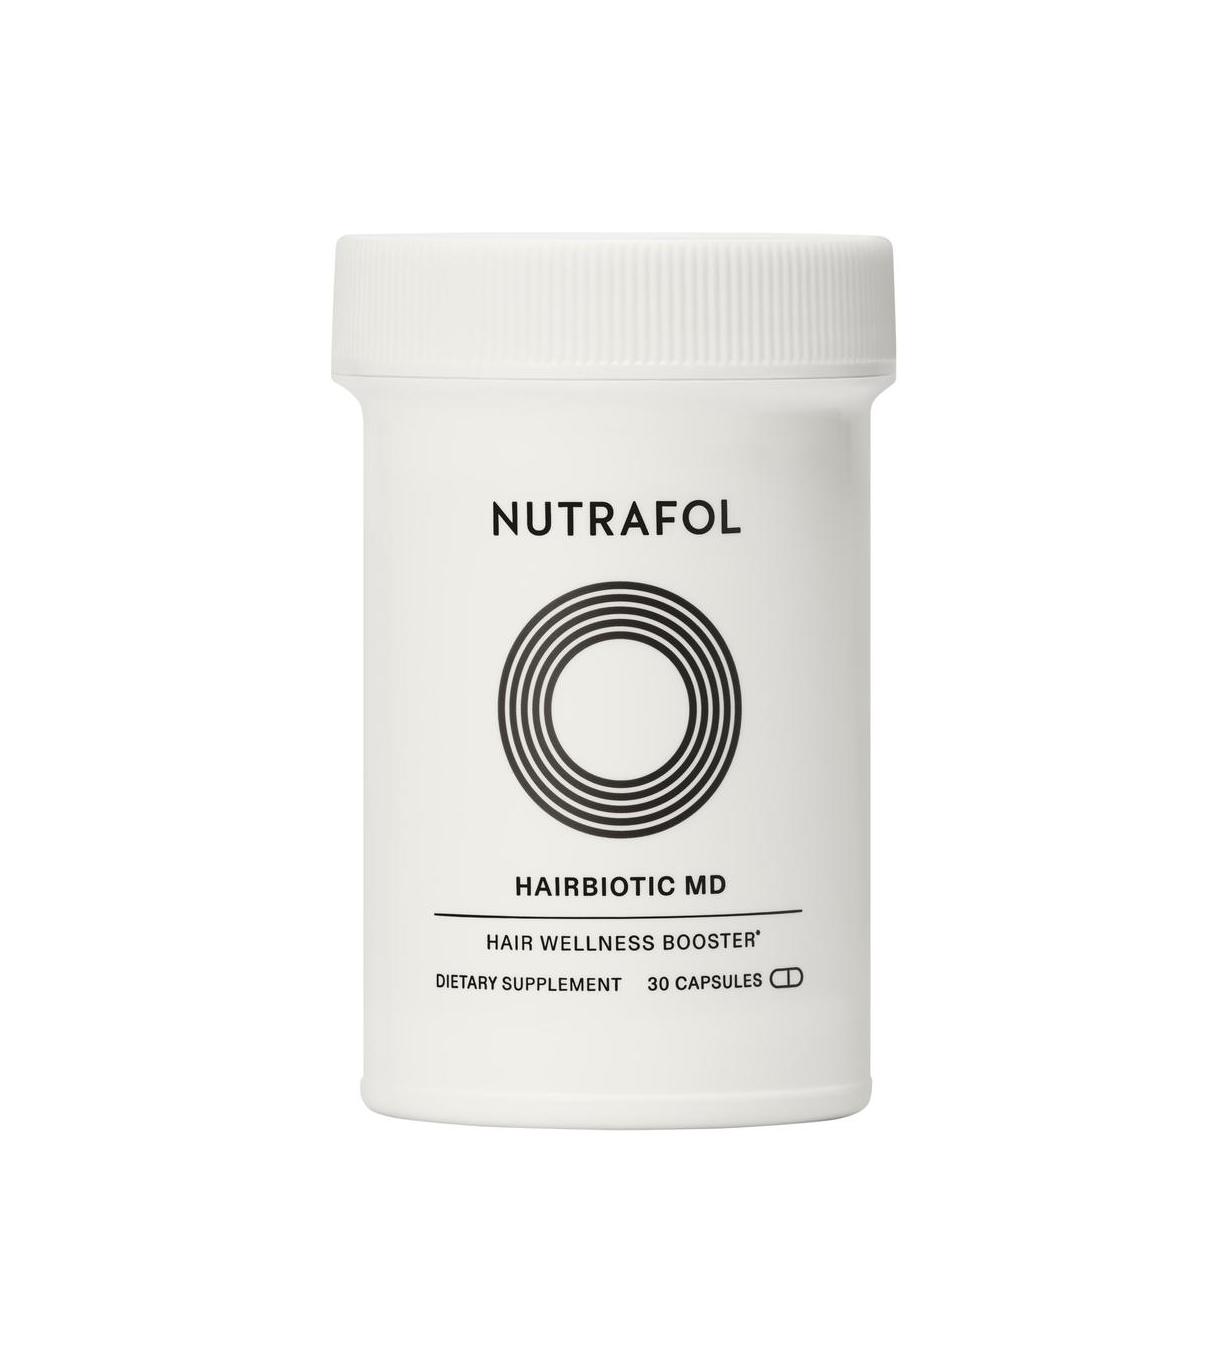 Nutrafol Hairbiotic MD Hair Wellness Booster Dietary Supplement (30 Capsules)